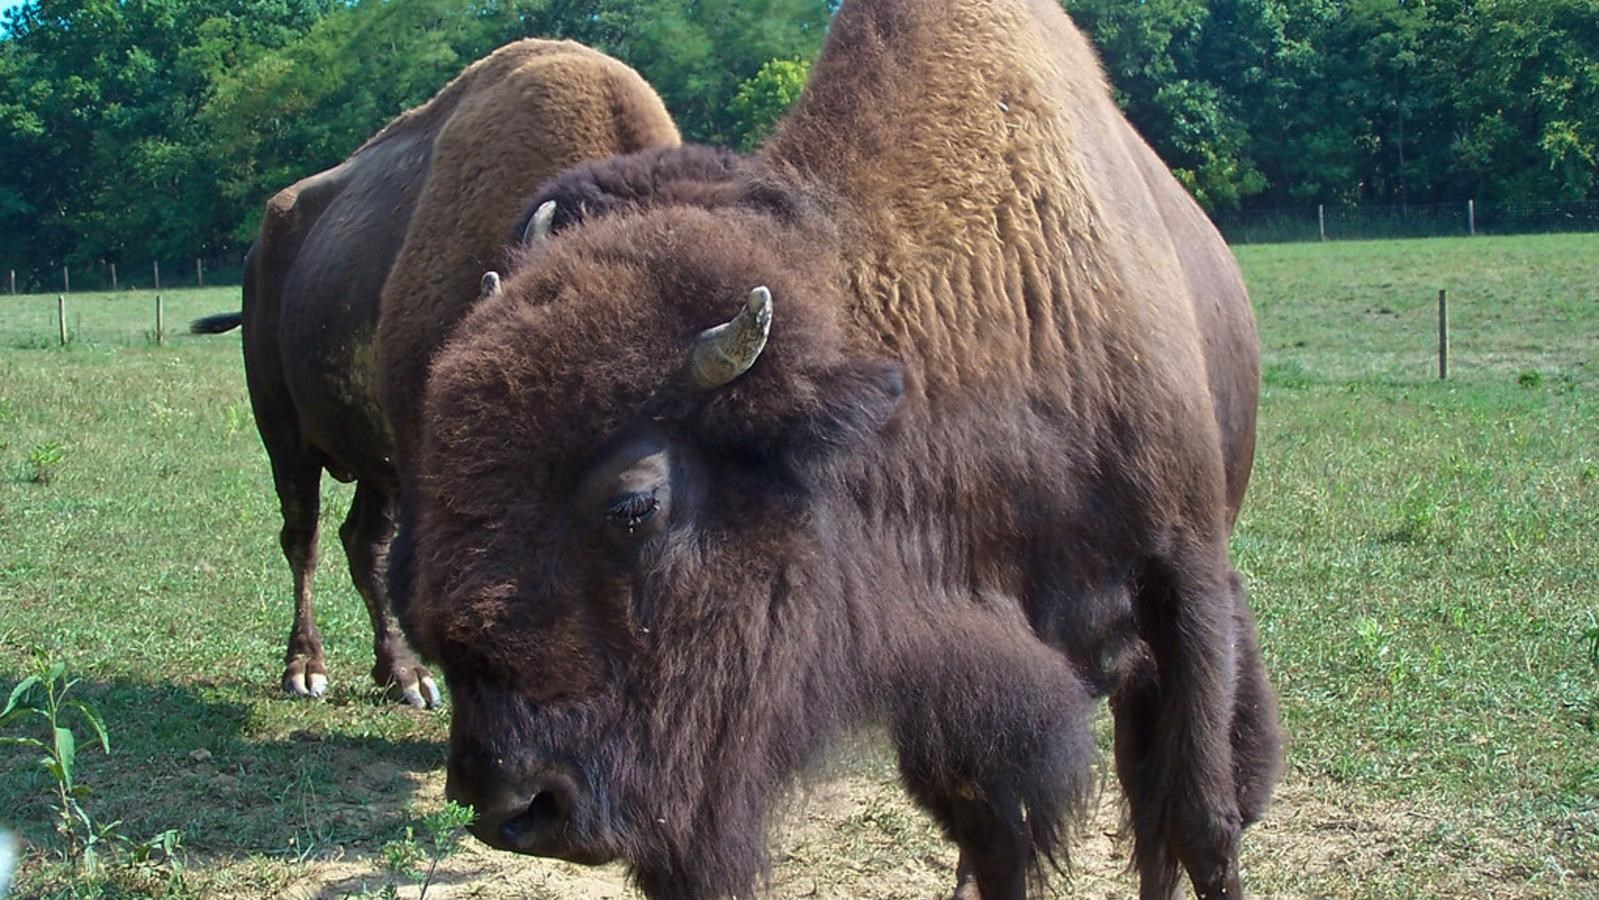 Two brown American Bison standing in green field. Bison in center is in left profile view, with smal